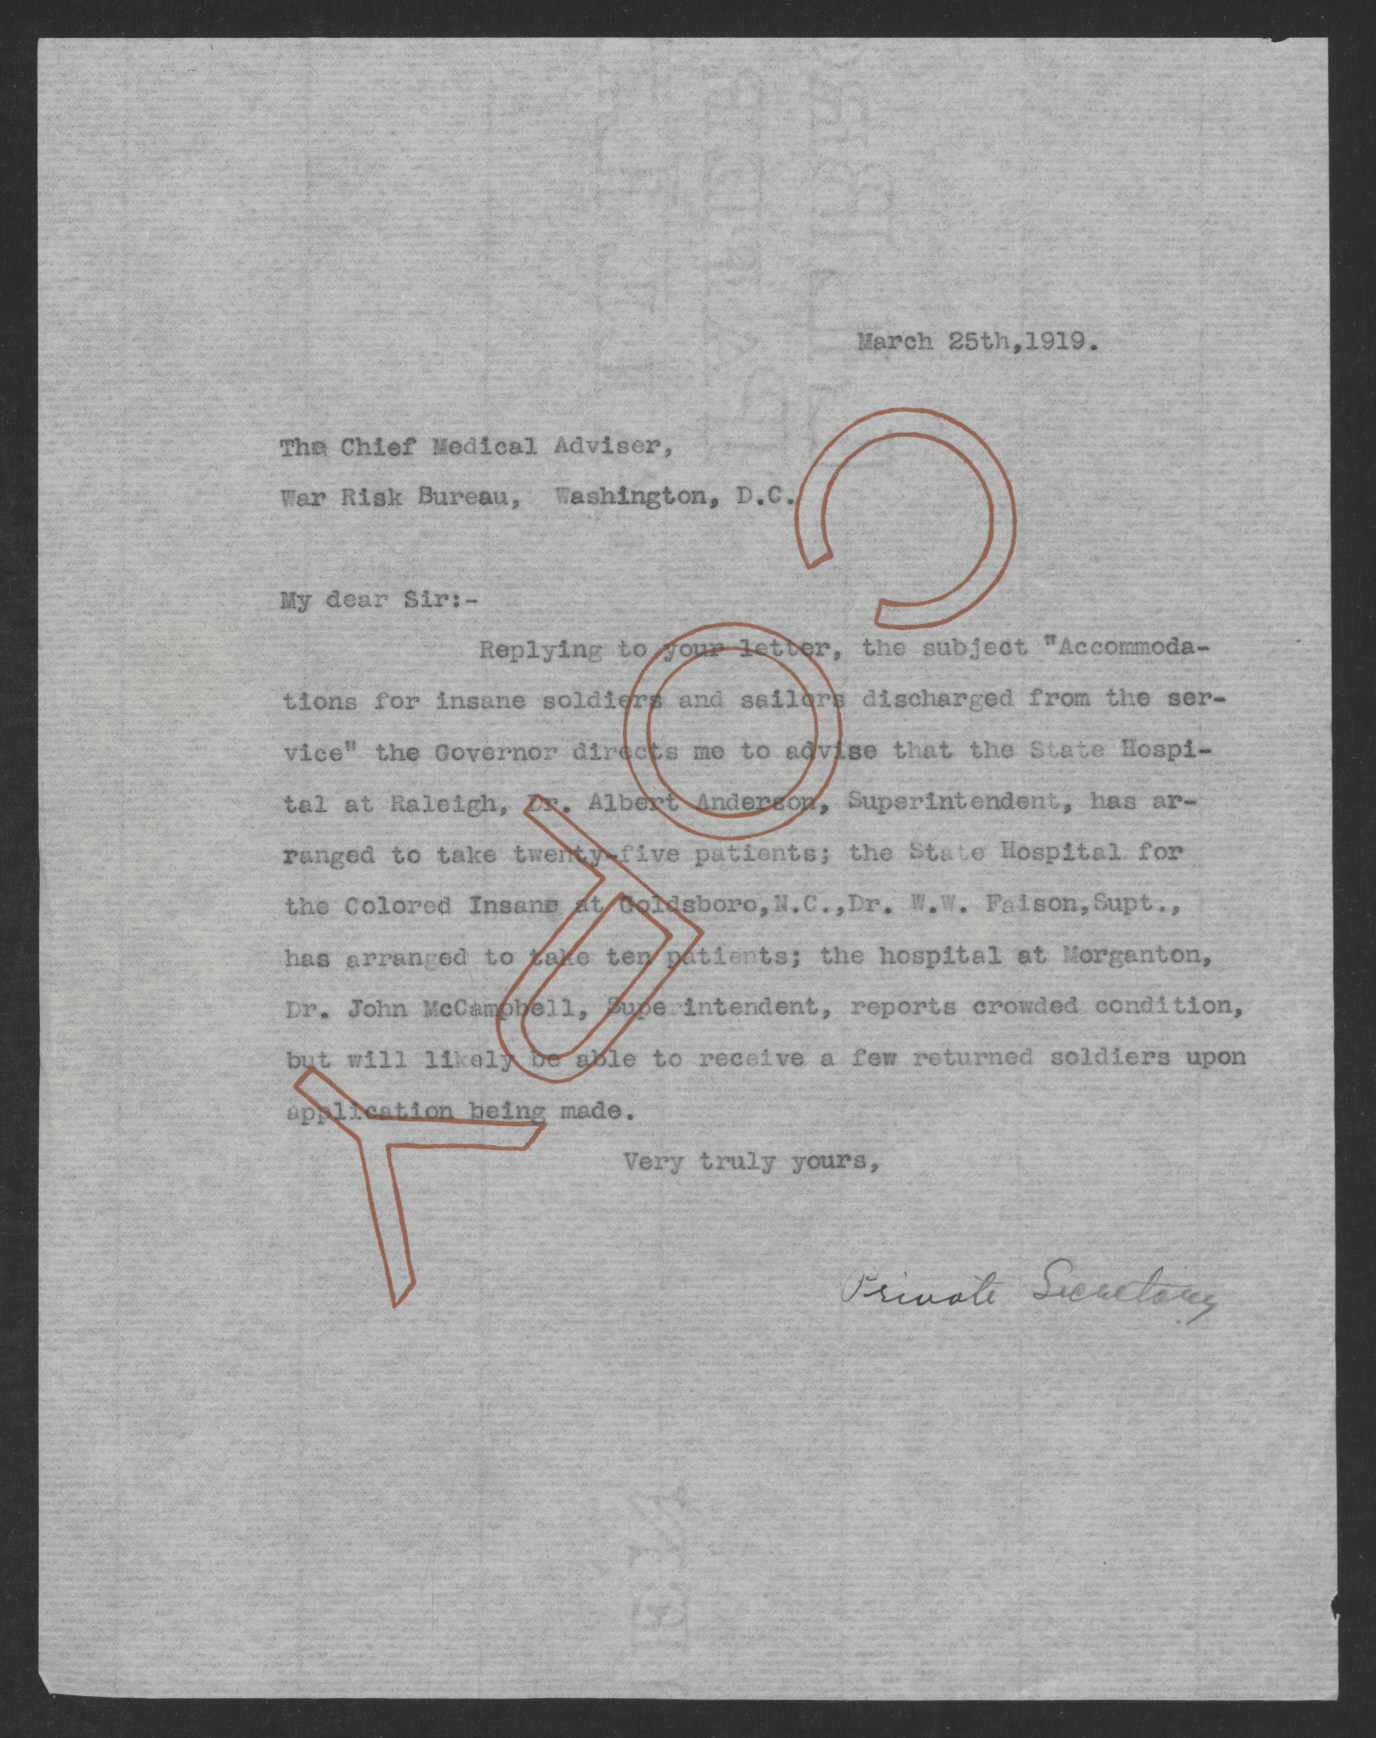 Letter from Santford Martin to Charles E. Banks, March 25, 1919